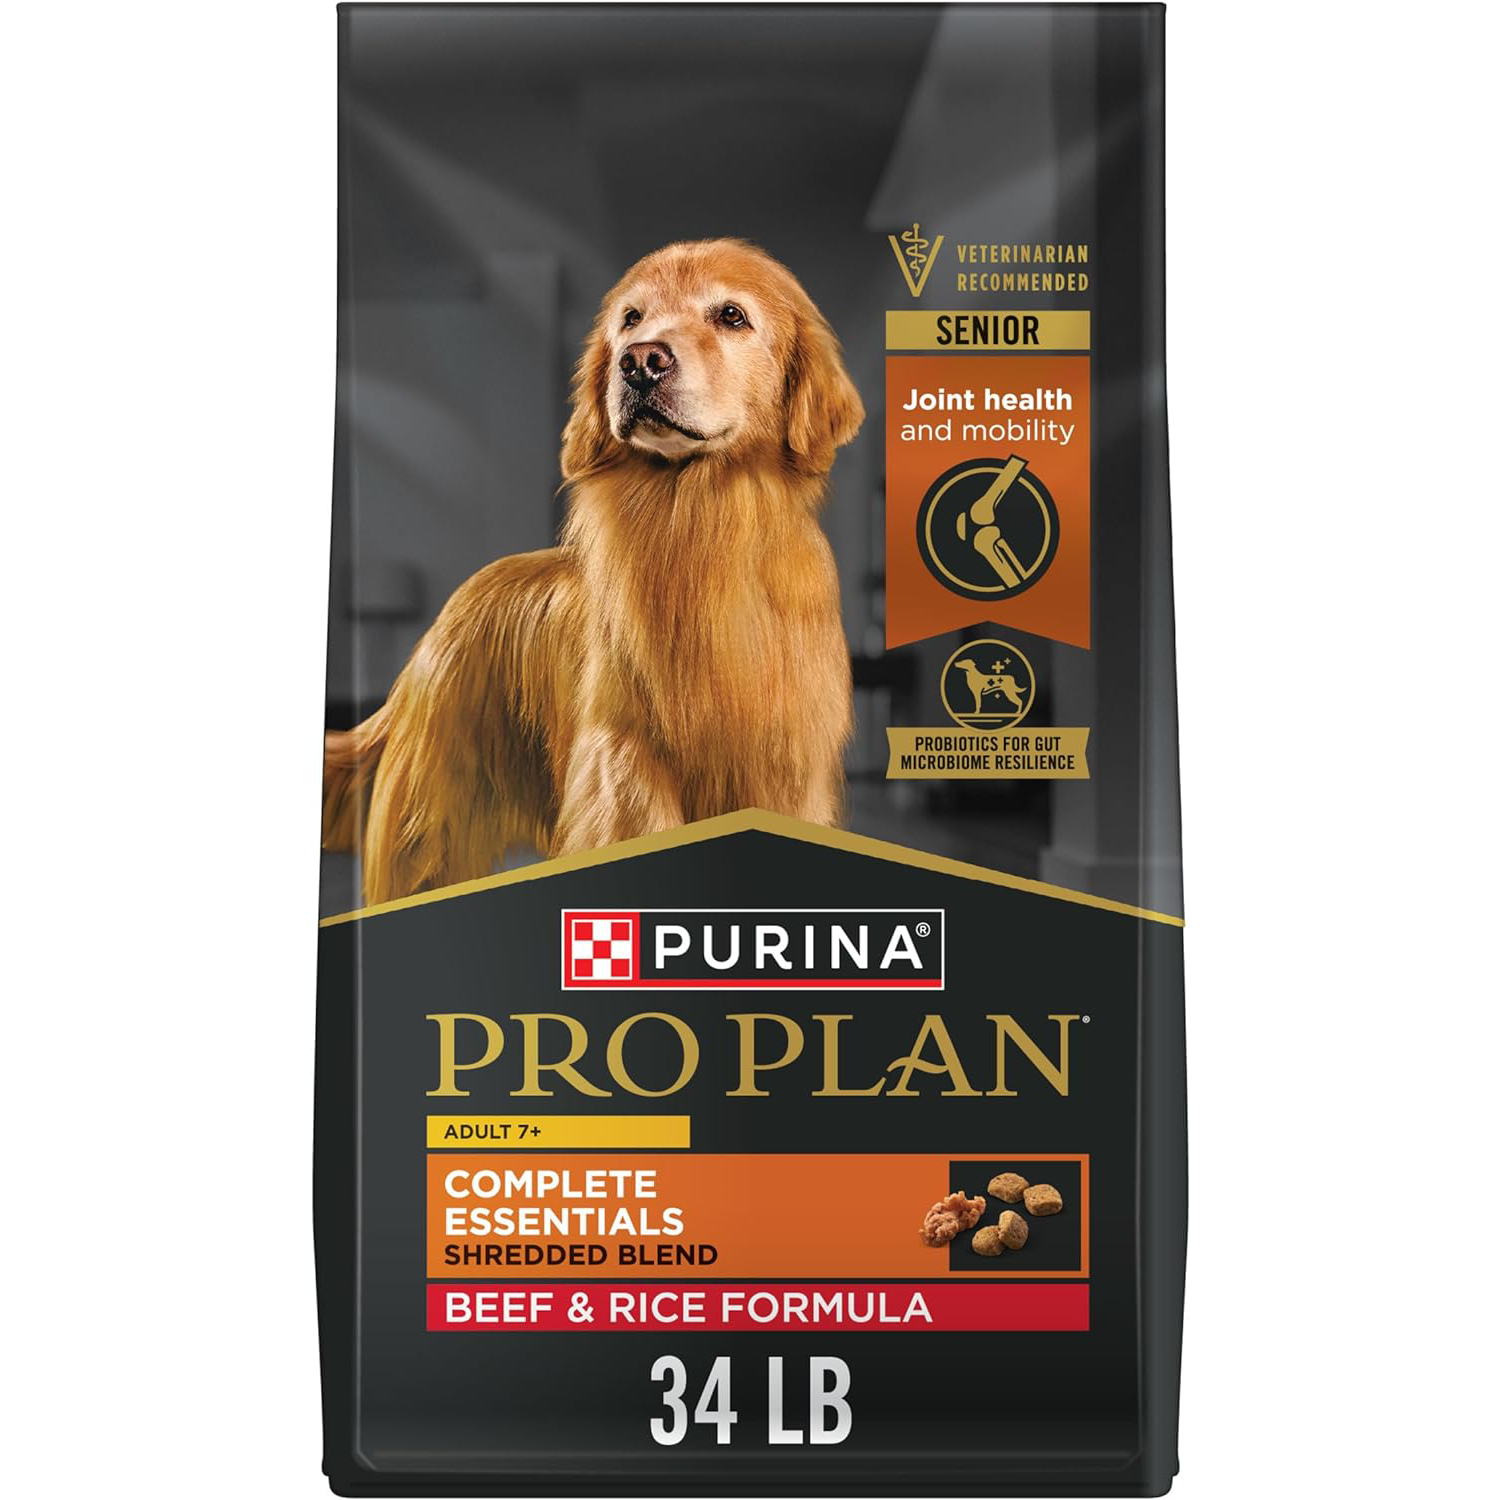 Purina Pro Plan Adult 7 Plus Complete Essentials Shredded Blend Beef and Rice Formula High Protein Dog Food for Senior Dogs